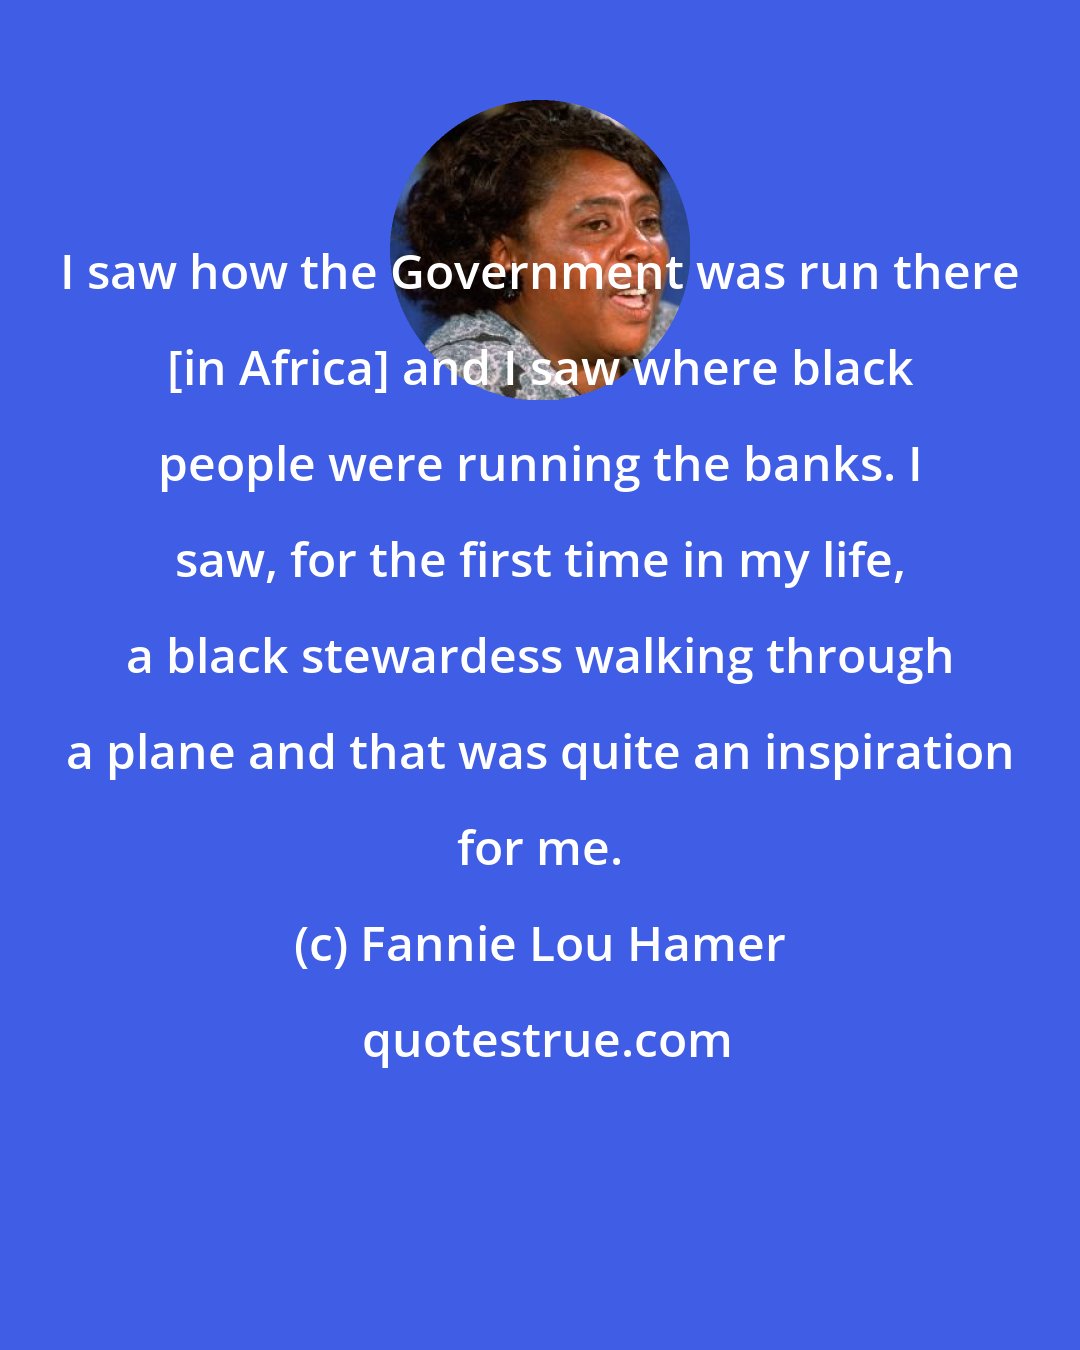 Fannie Lou Hamer: I saw how the Government was run there [in Africa] and I saw where black people were running the banks. I saw, for the first time in my life, a black stewardess walking through a plane and that was quite an inspiration for me.